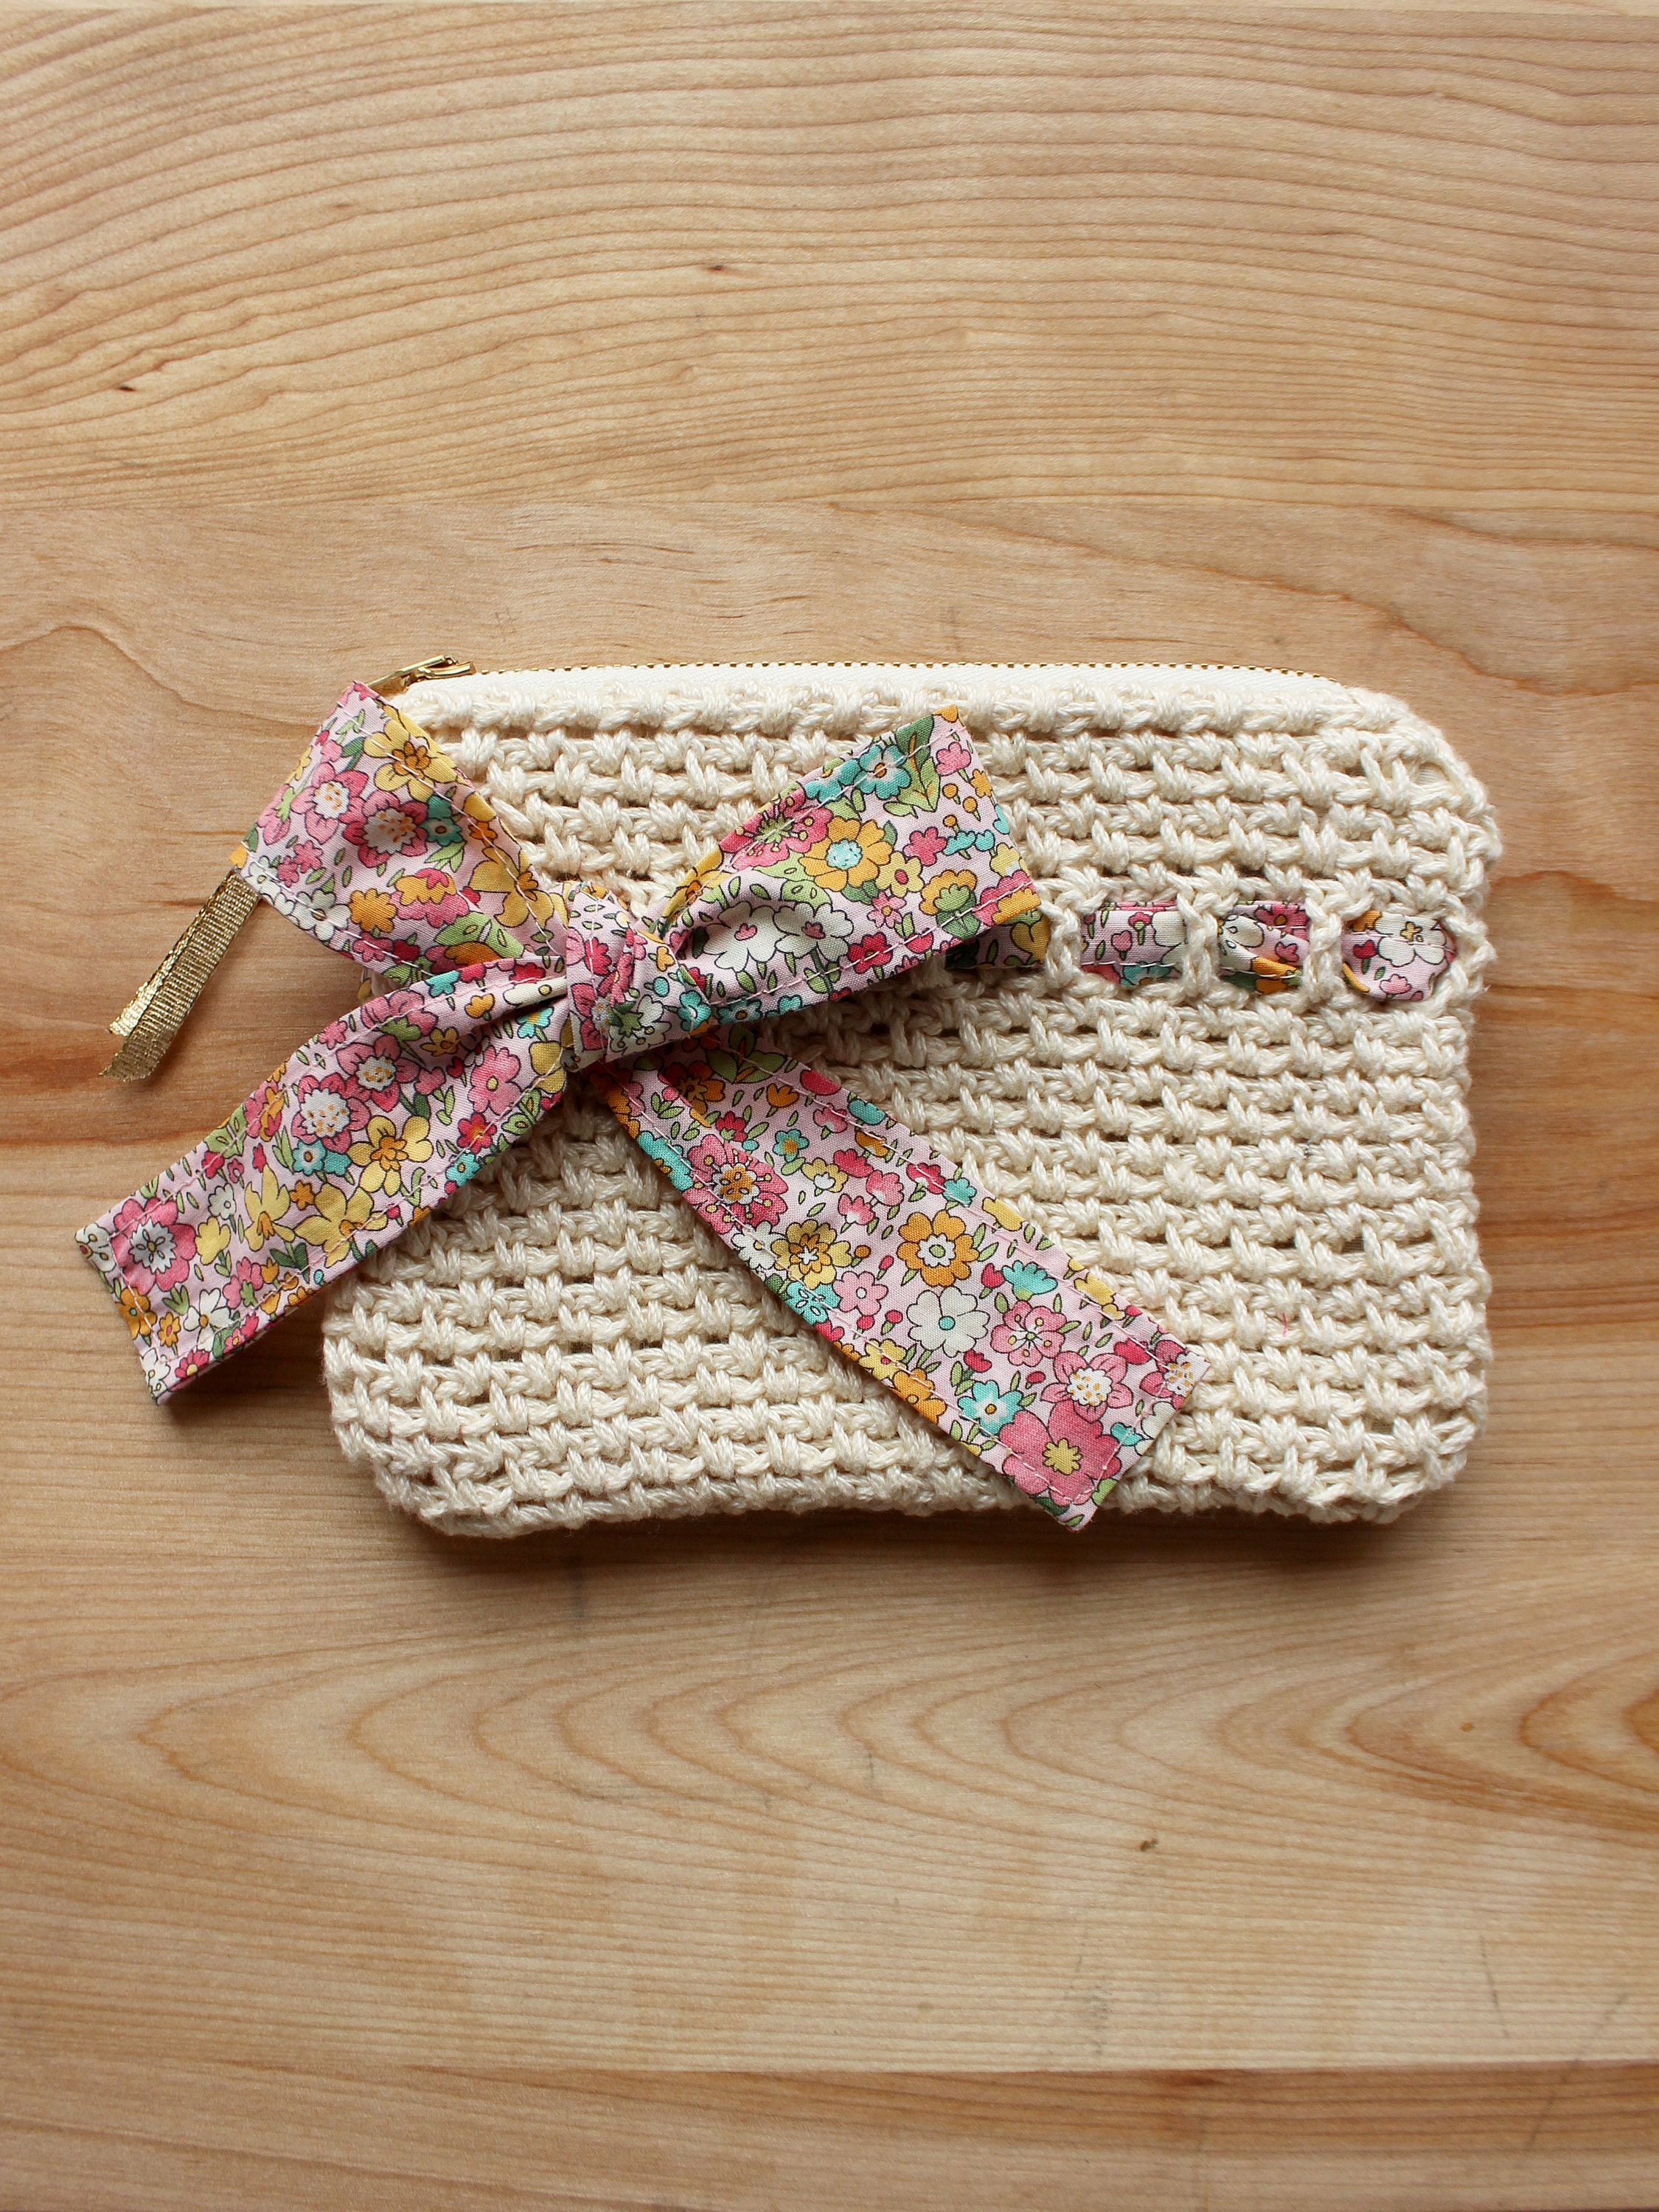 How to Crochet a Purse (Moss Stitch Purse - Free Pattern) | Jo to the World  Creations